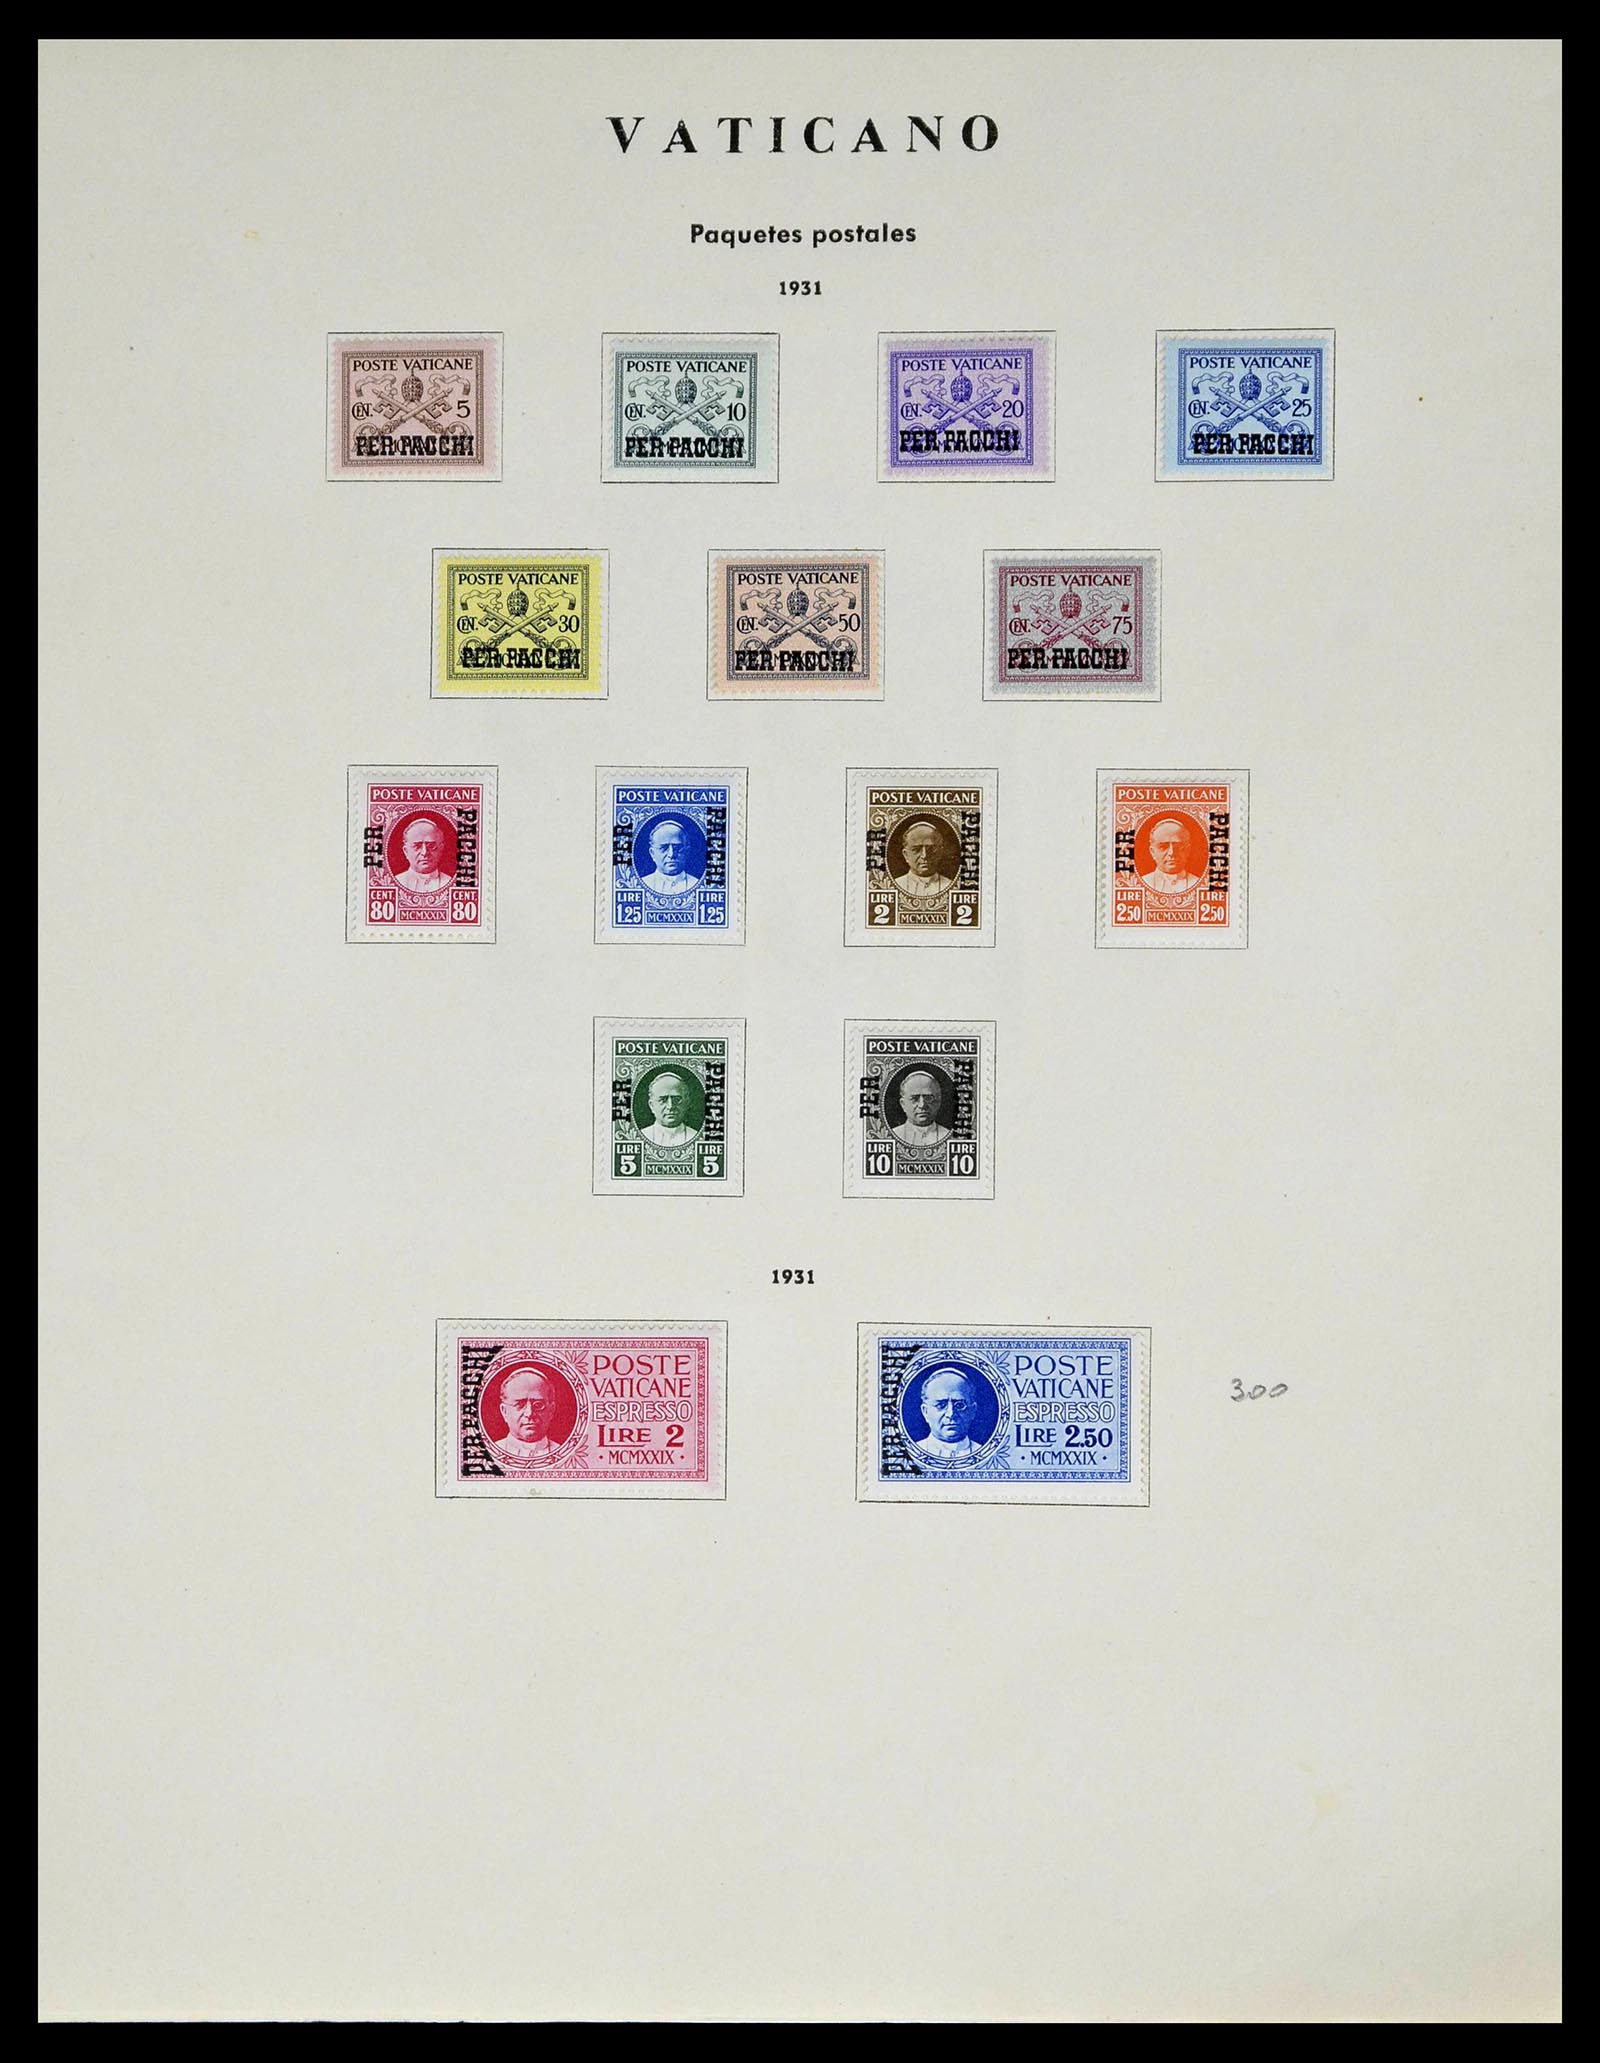 39249 0072 - Stamp collection 39249 Vatican 1852-1986.